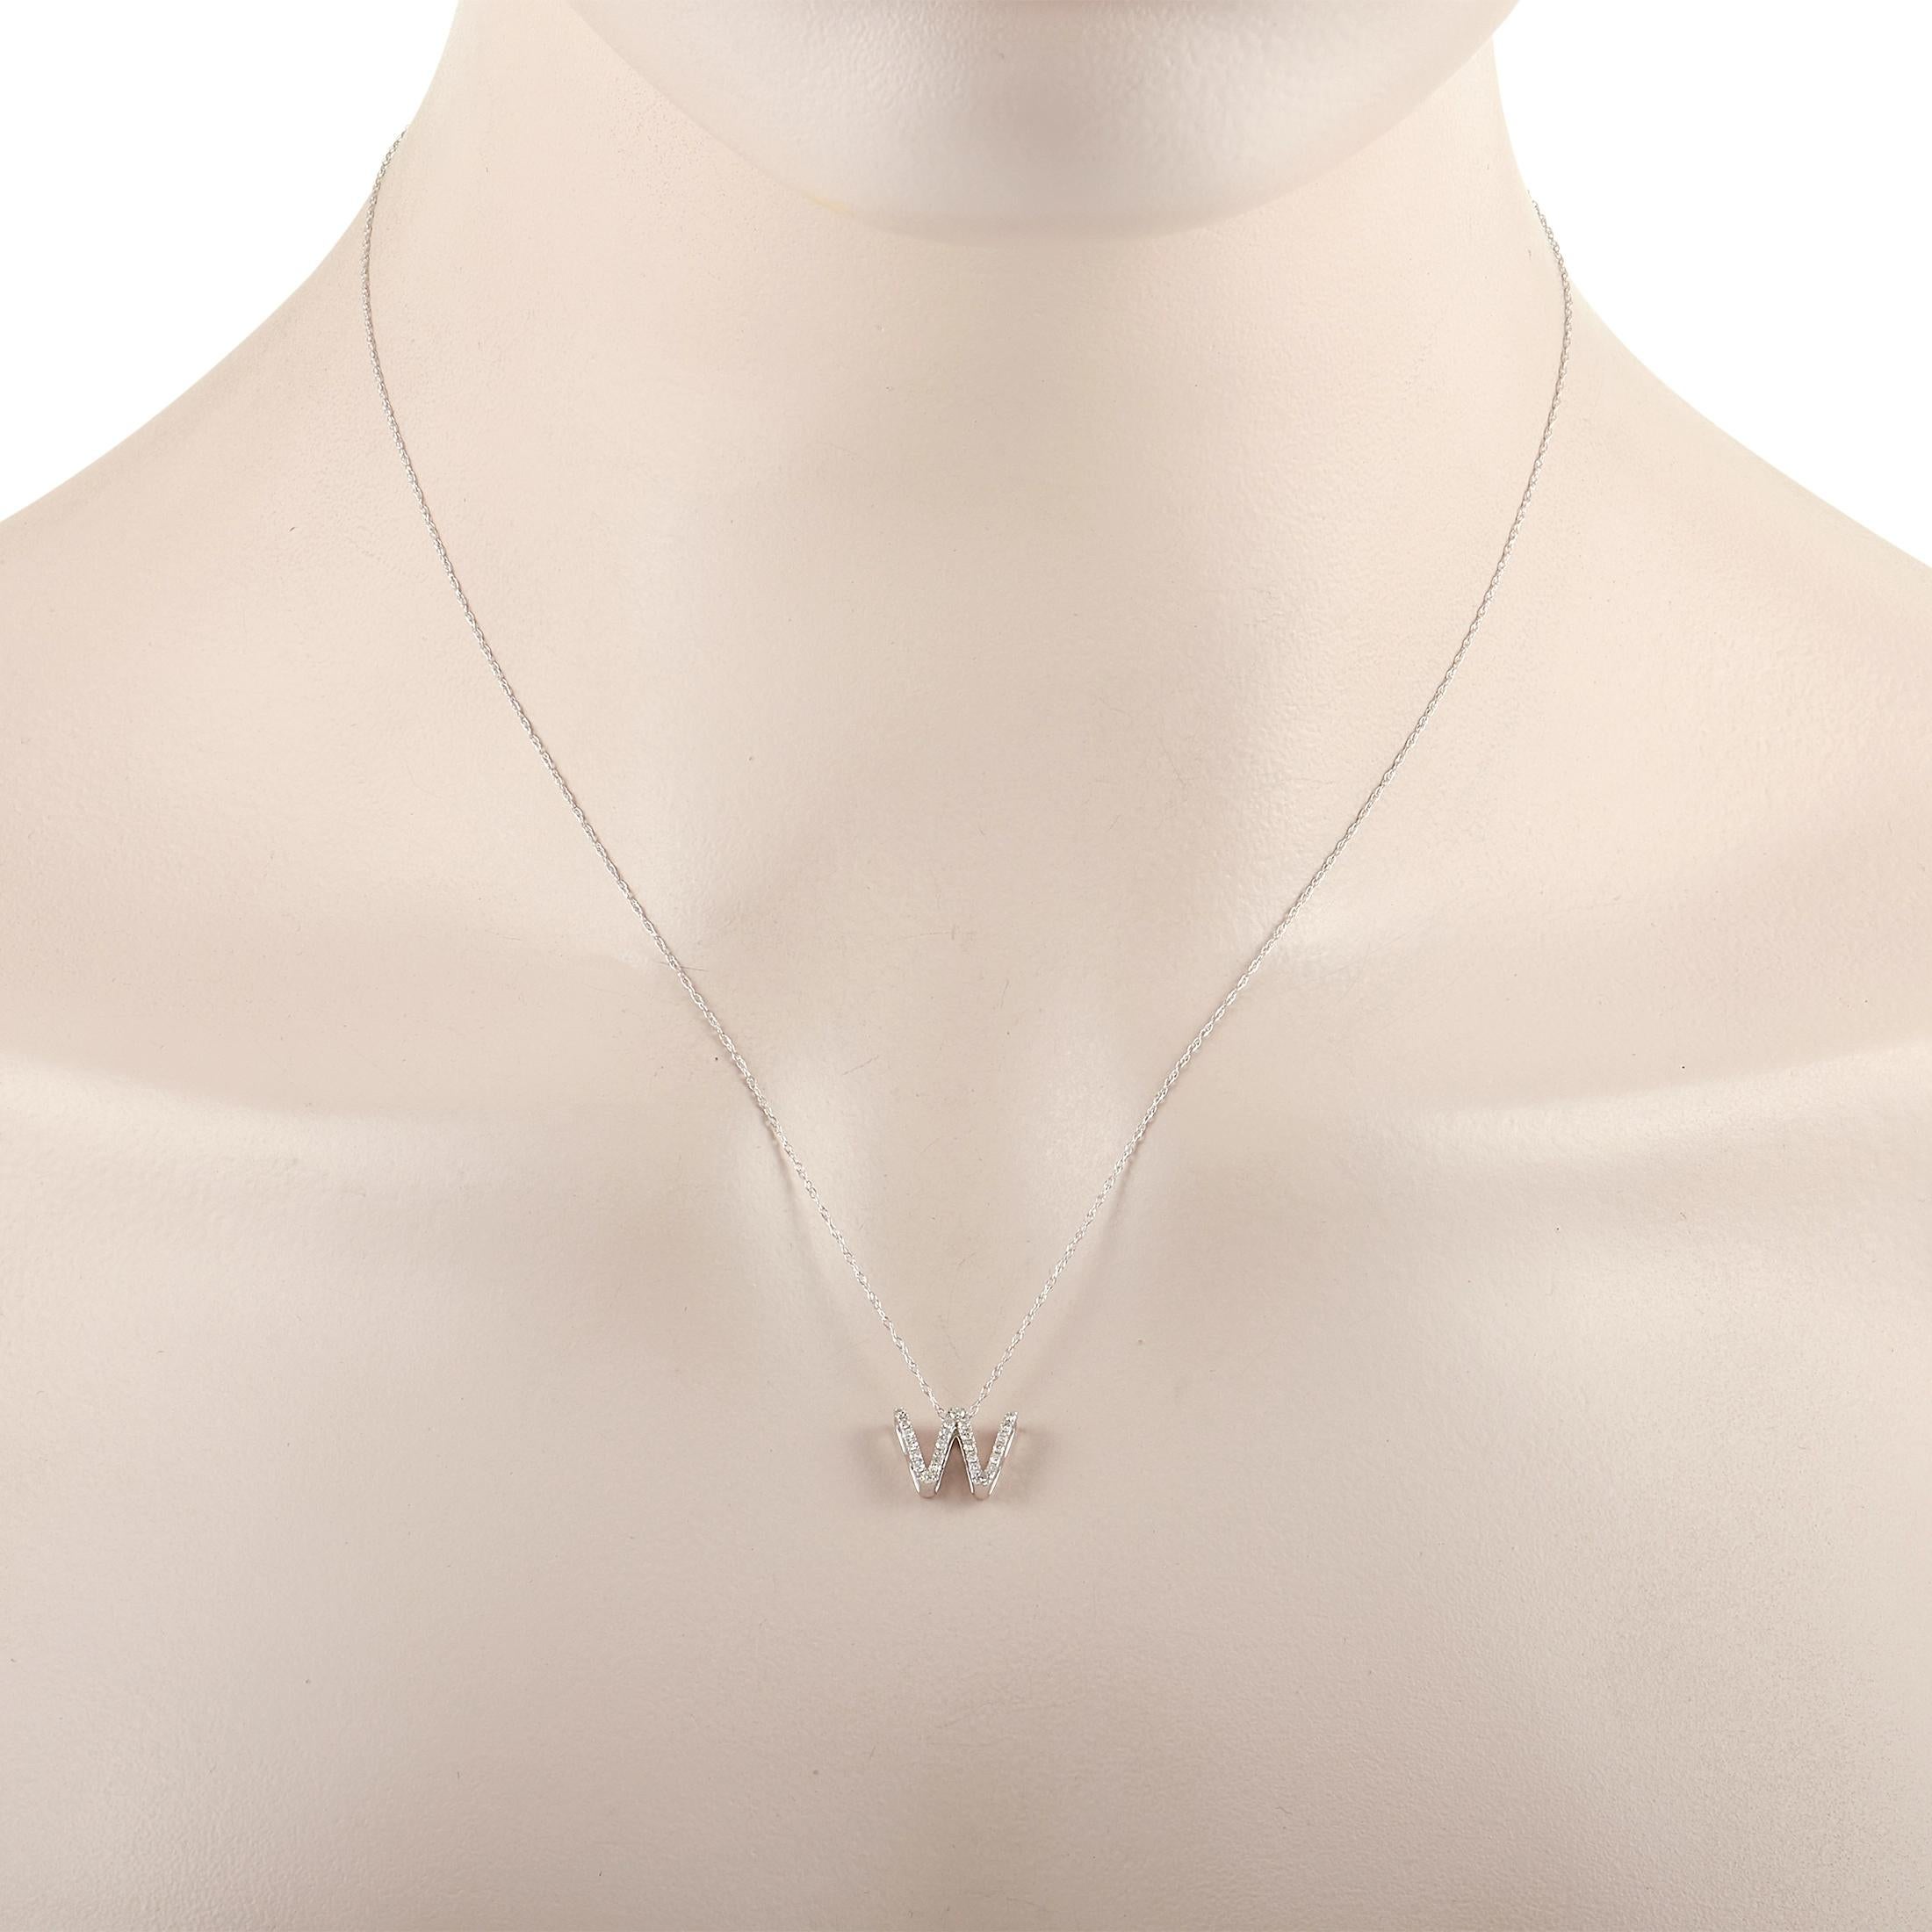 This pretty LB Exclusive 14K White Gold 0.10 ct Diamond Initial ‘W’ Necklace is made with a delicate 14K white gold chain and features a small white gold pendant shaped like the letter ‘W’ and set with 0.10 carats of round diamonds throughout. The